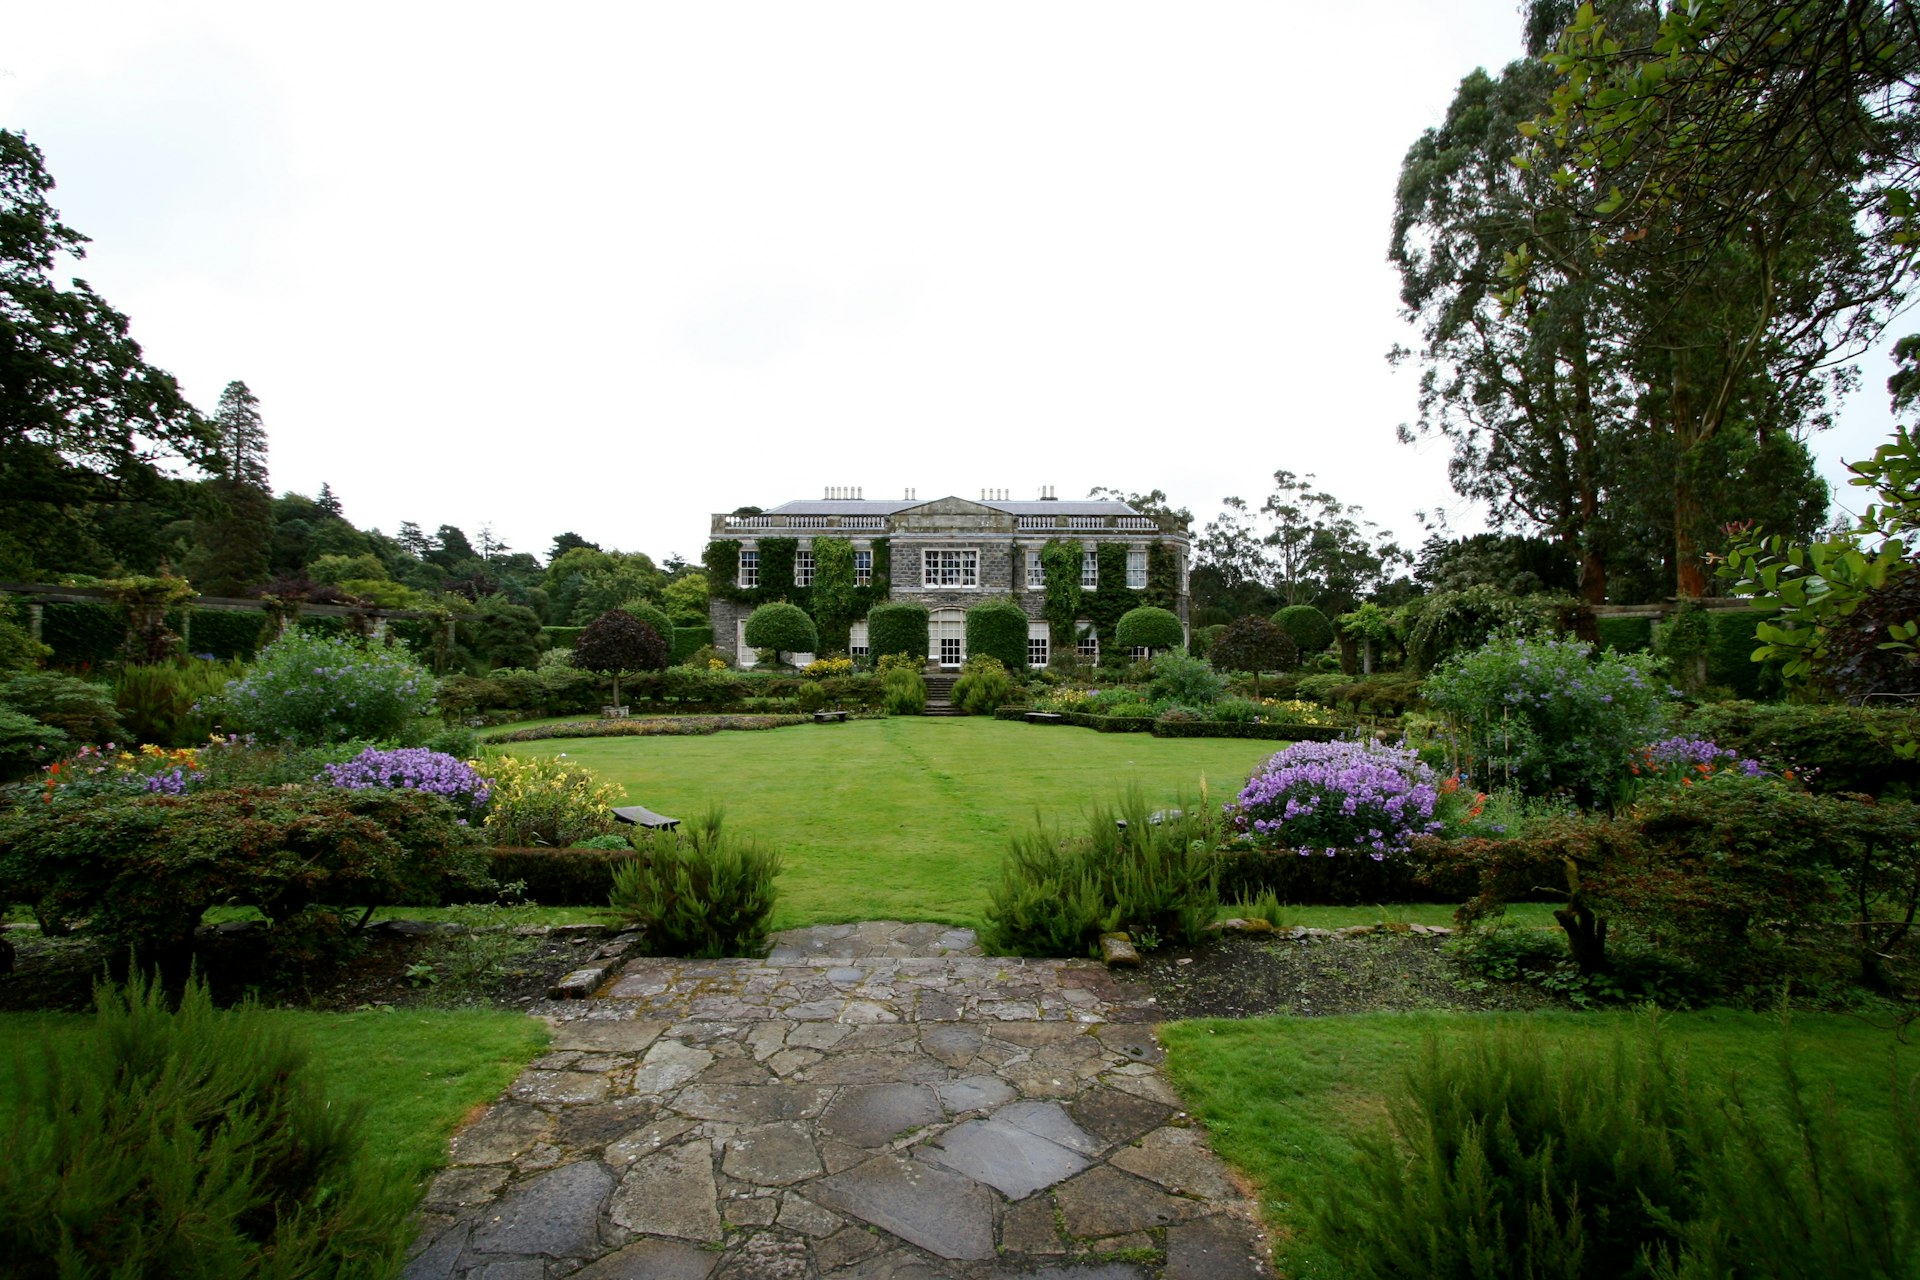 Mount Stewart House & Gardens. Image by Ramón / CC BY-SA 2.0